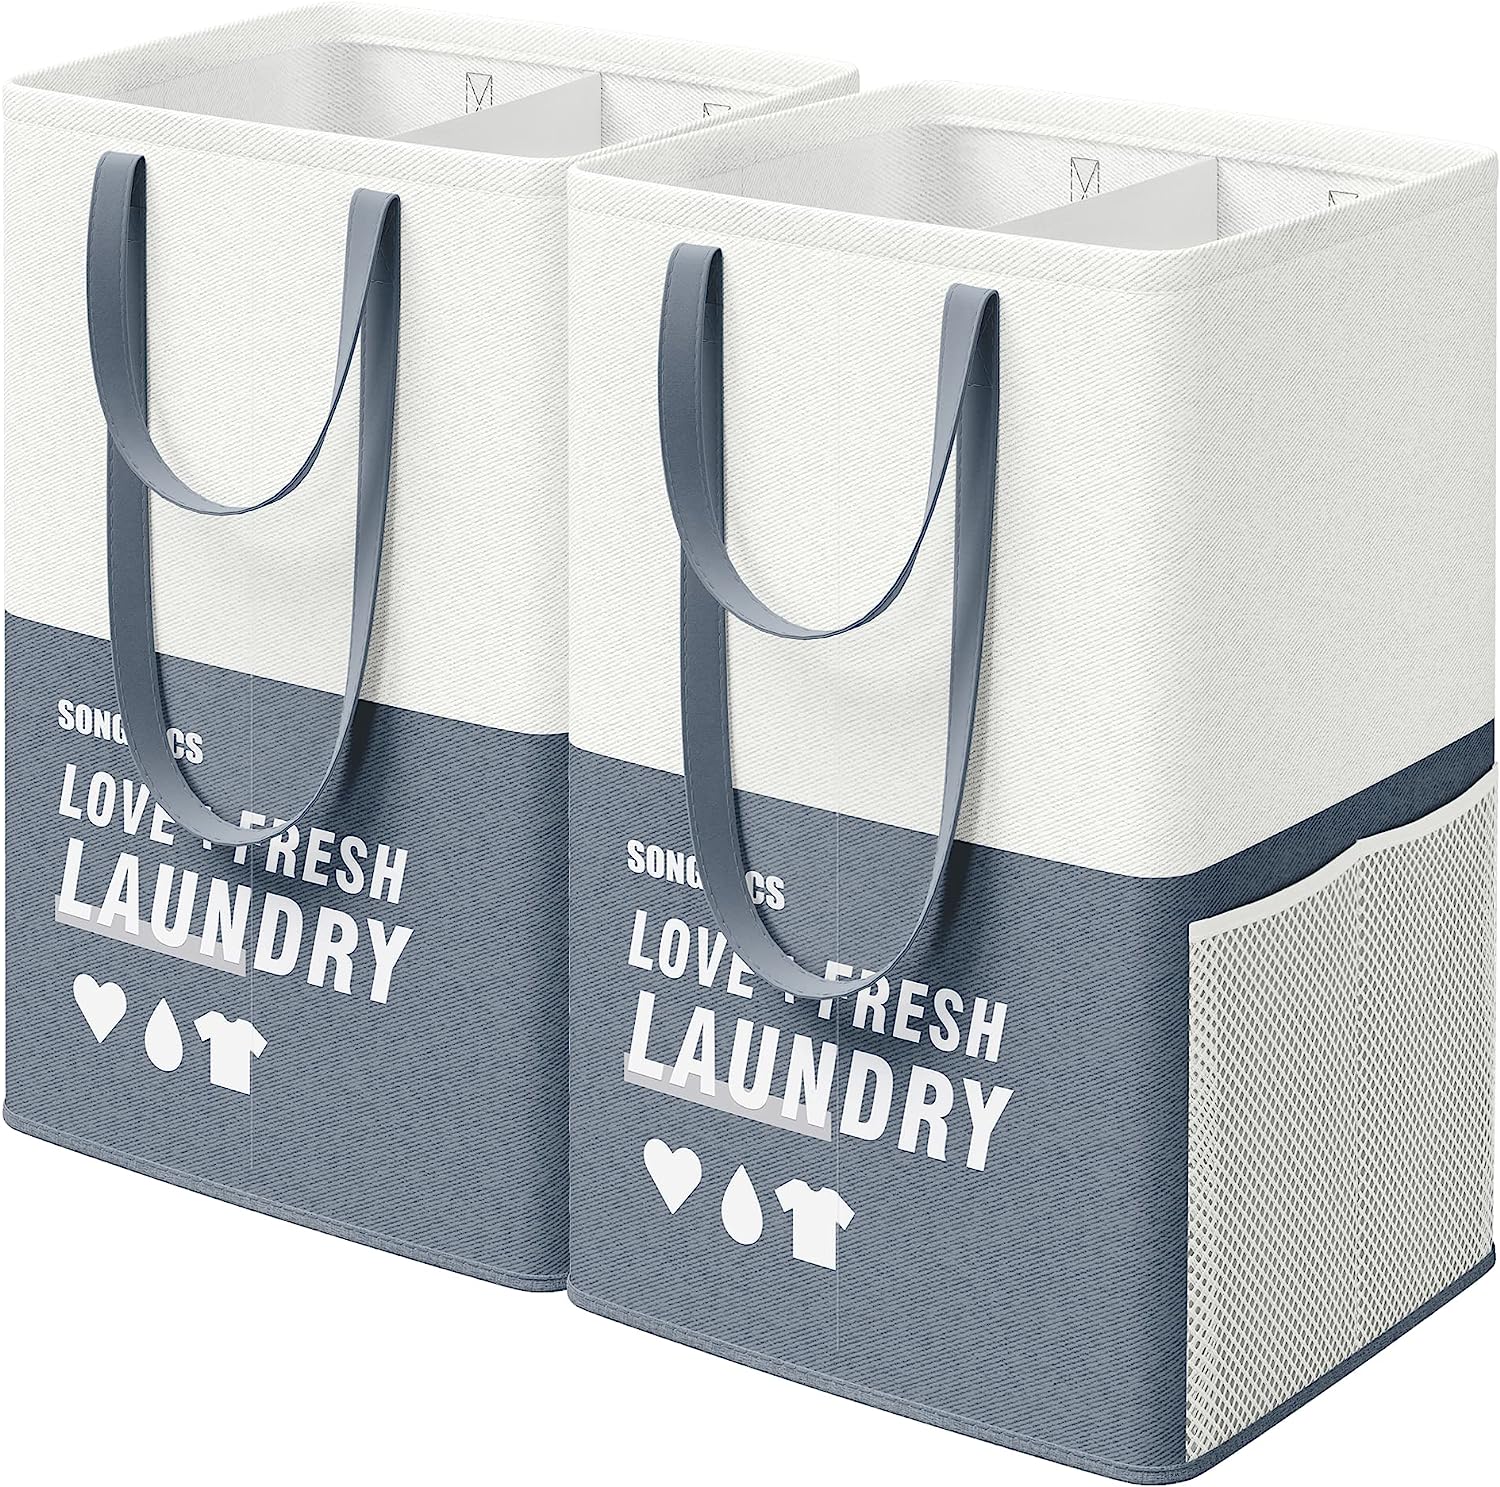 Blushbees® Set of 2 Collapsible Laundry Baskets